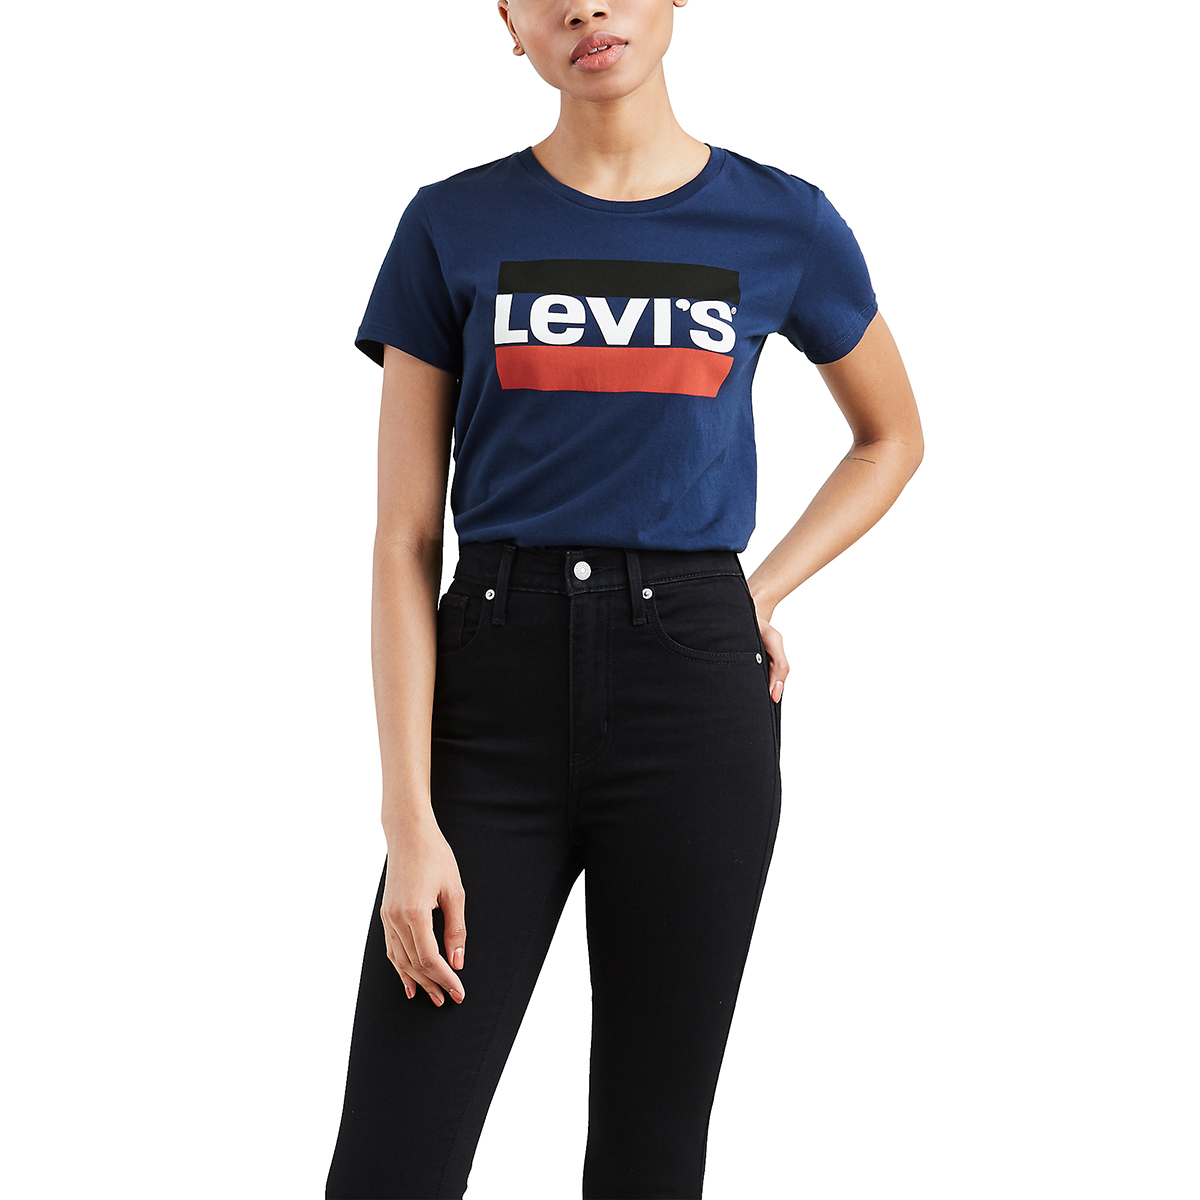 Levi's Women's Perfect Graphic Tee - Blue, S